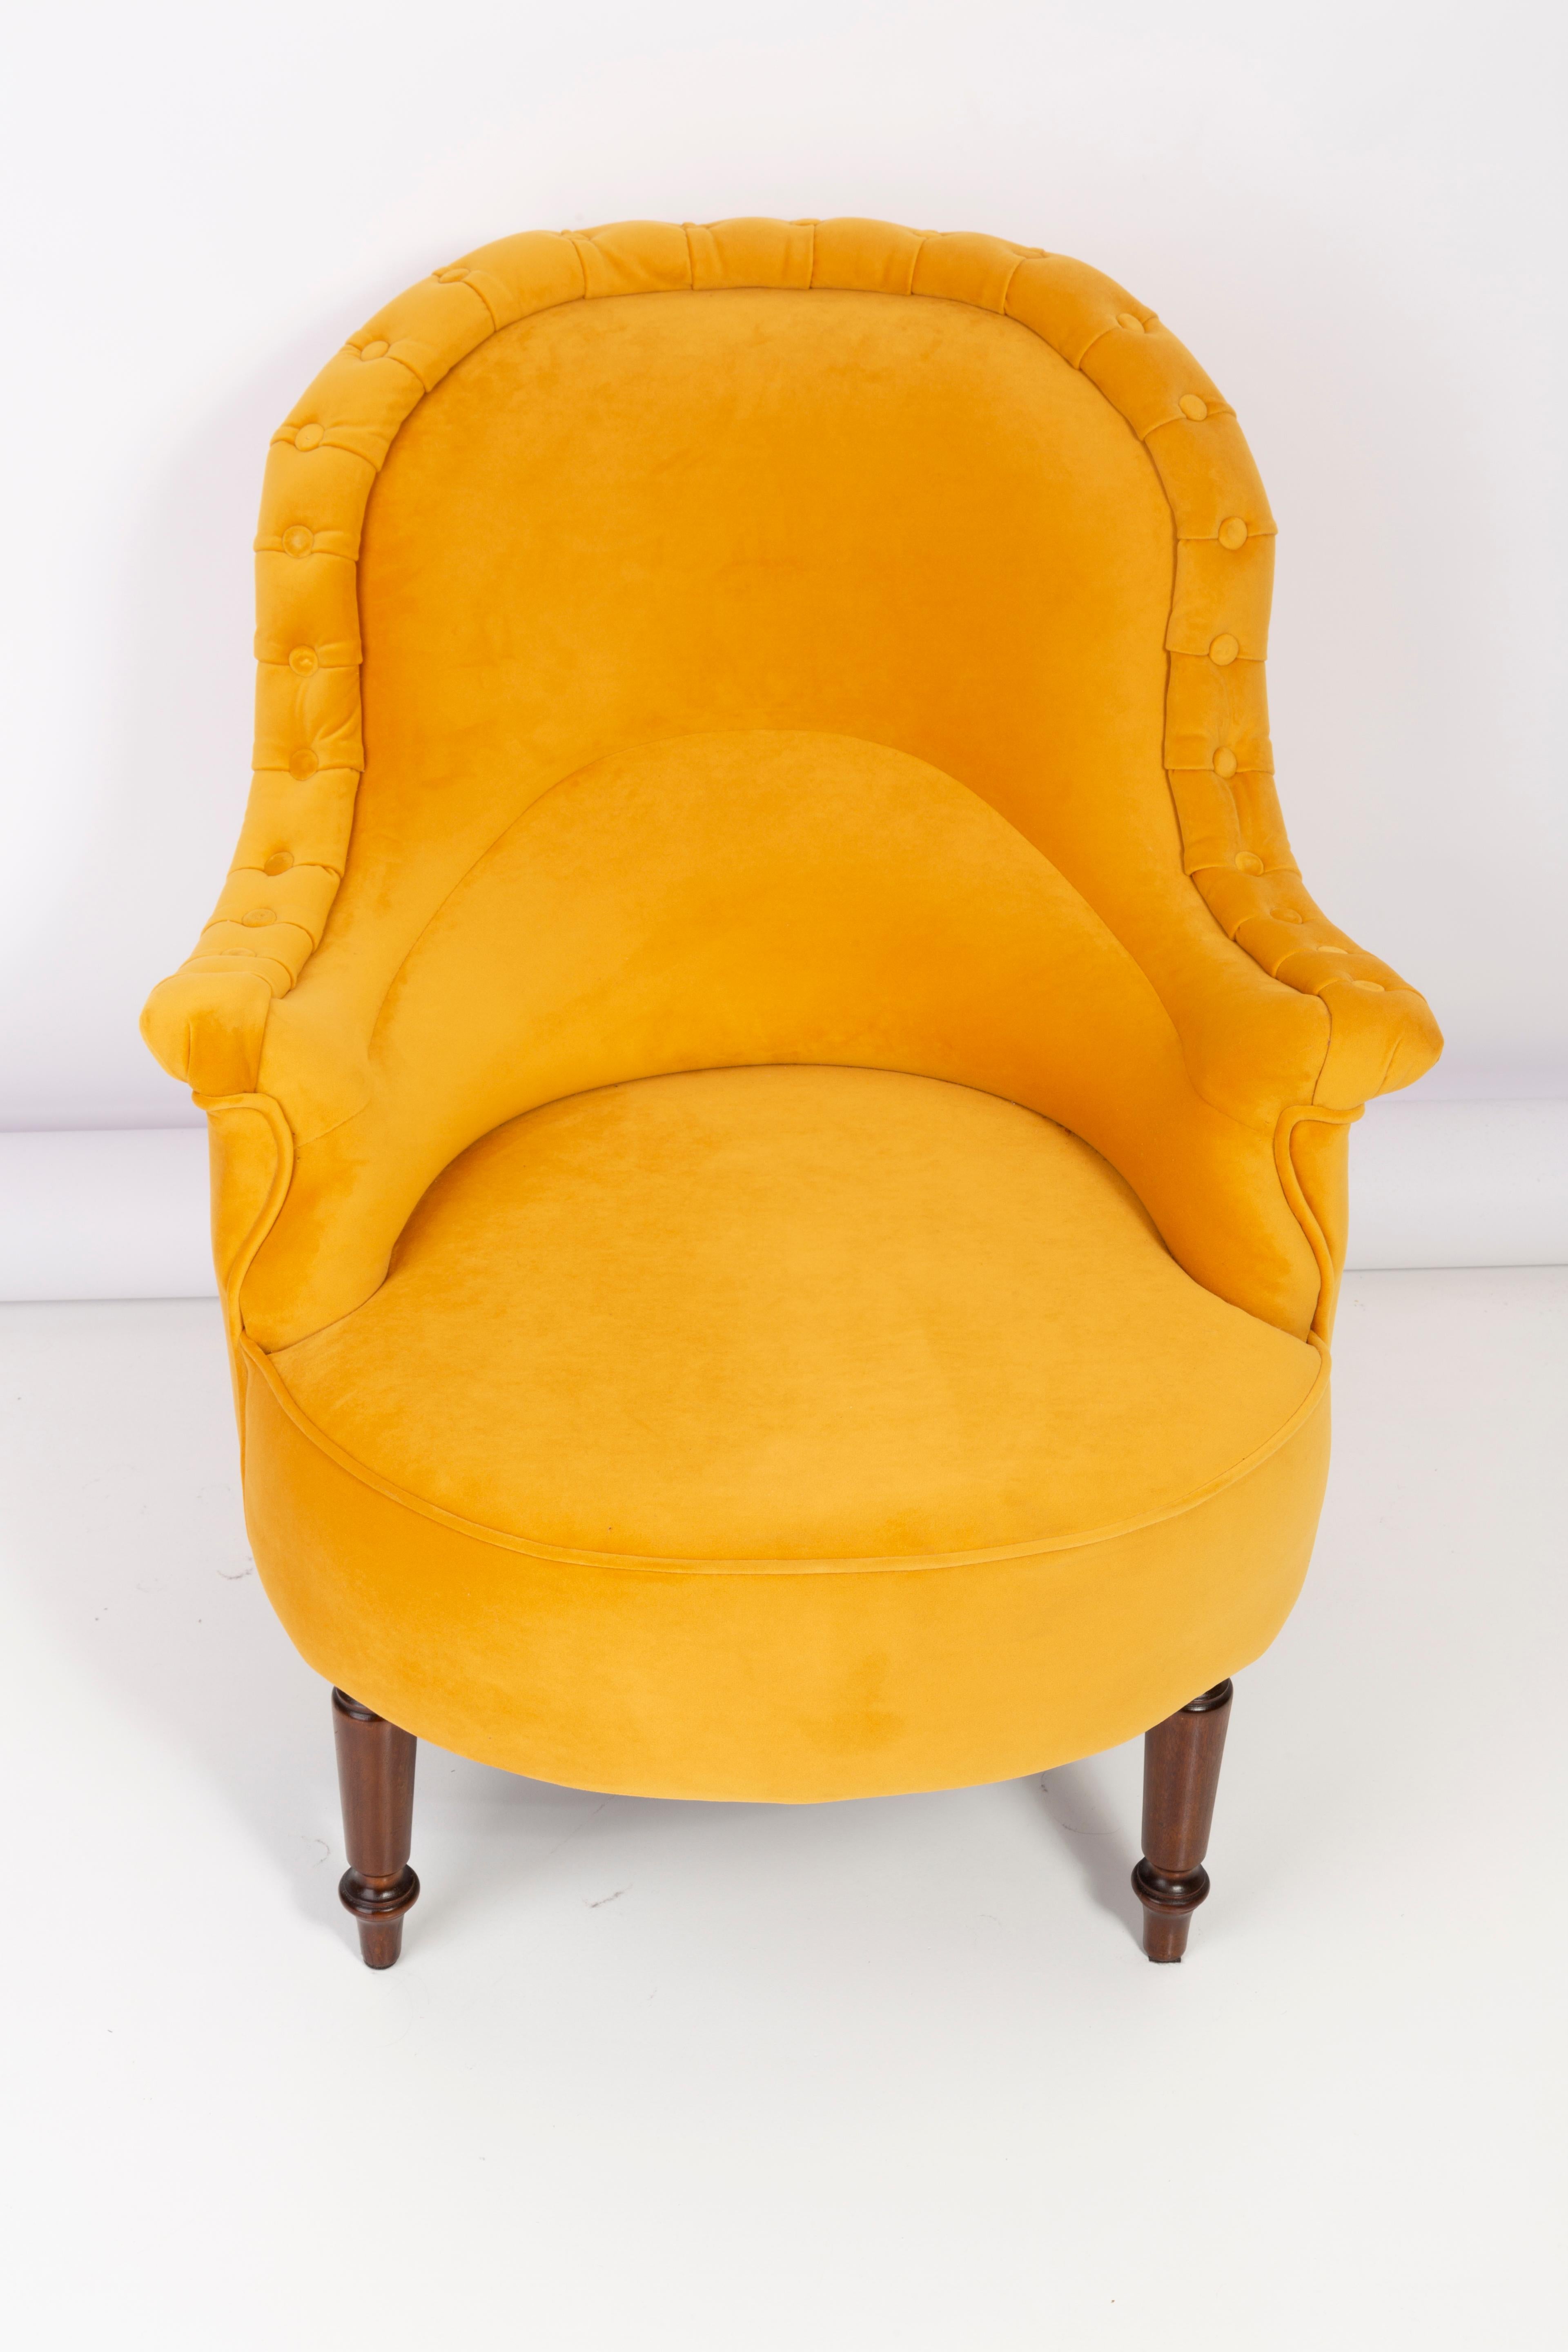 Pair of Unique Yellow Mustard Armchairs, 1930s, Germany For Sale 3